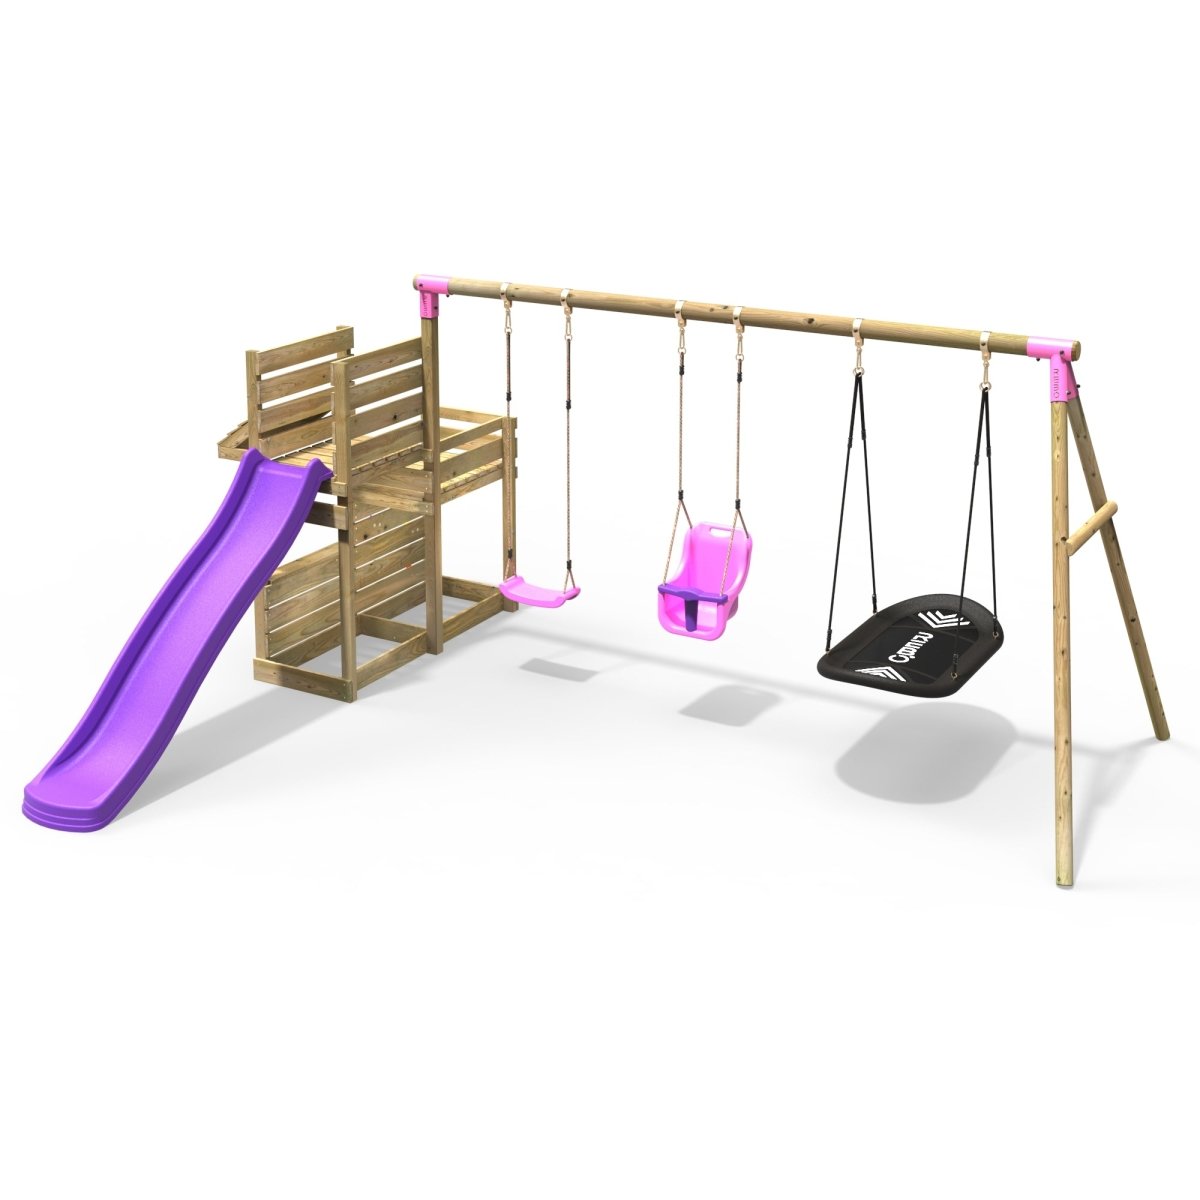 Rebo Wooden Swing Set with Deluxe Add on Deck & 8FT Slide - Halley Pink